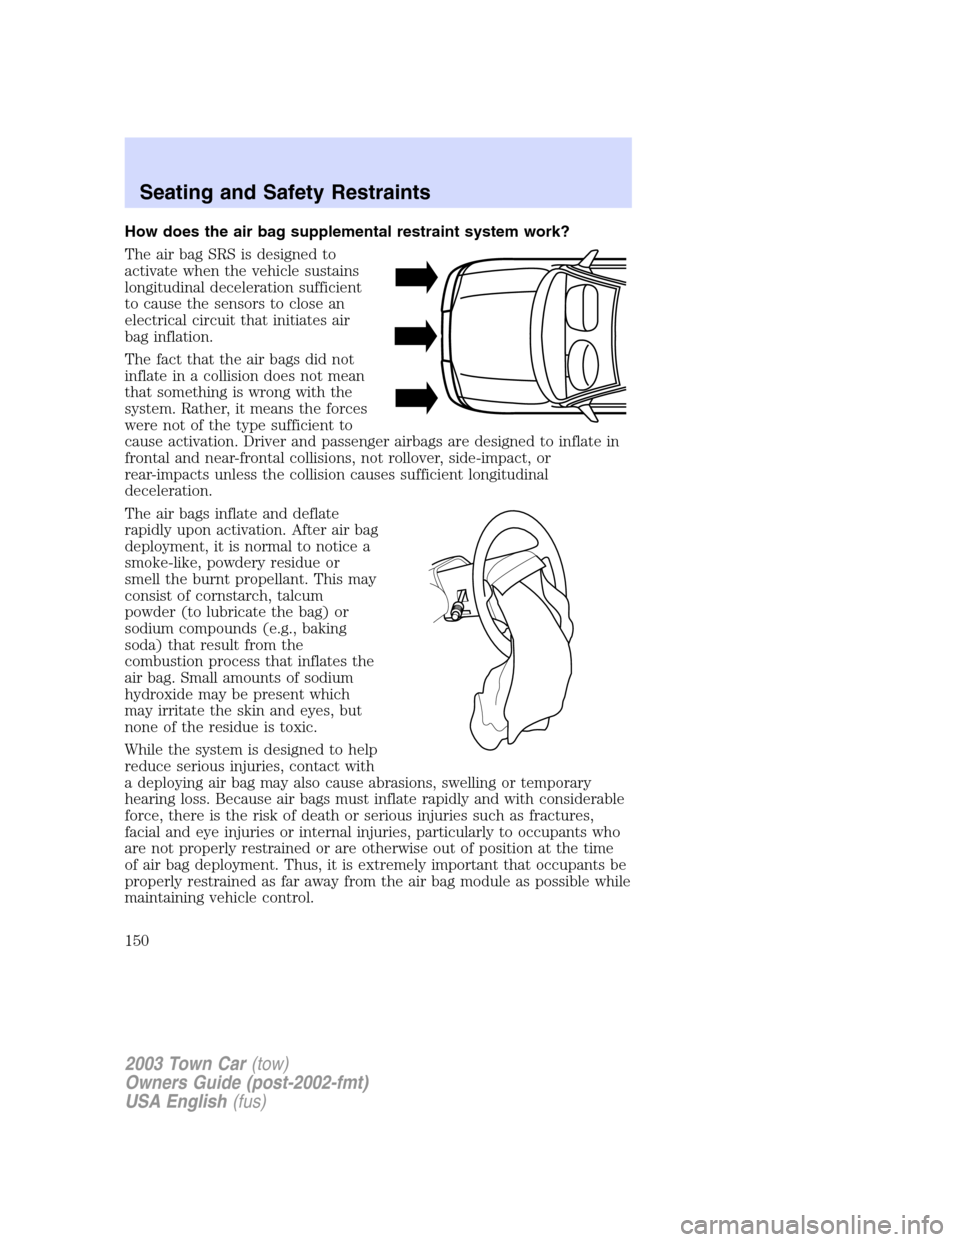 LINCOLN TOWN CAR 2003  Owners Manual How does the air bag supplemental restraint system work?
The air bag SRS is designed to
activate when the vehicle sustains
longitudinal deceleration sufficient
to cause the sensors to close an
electri